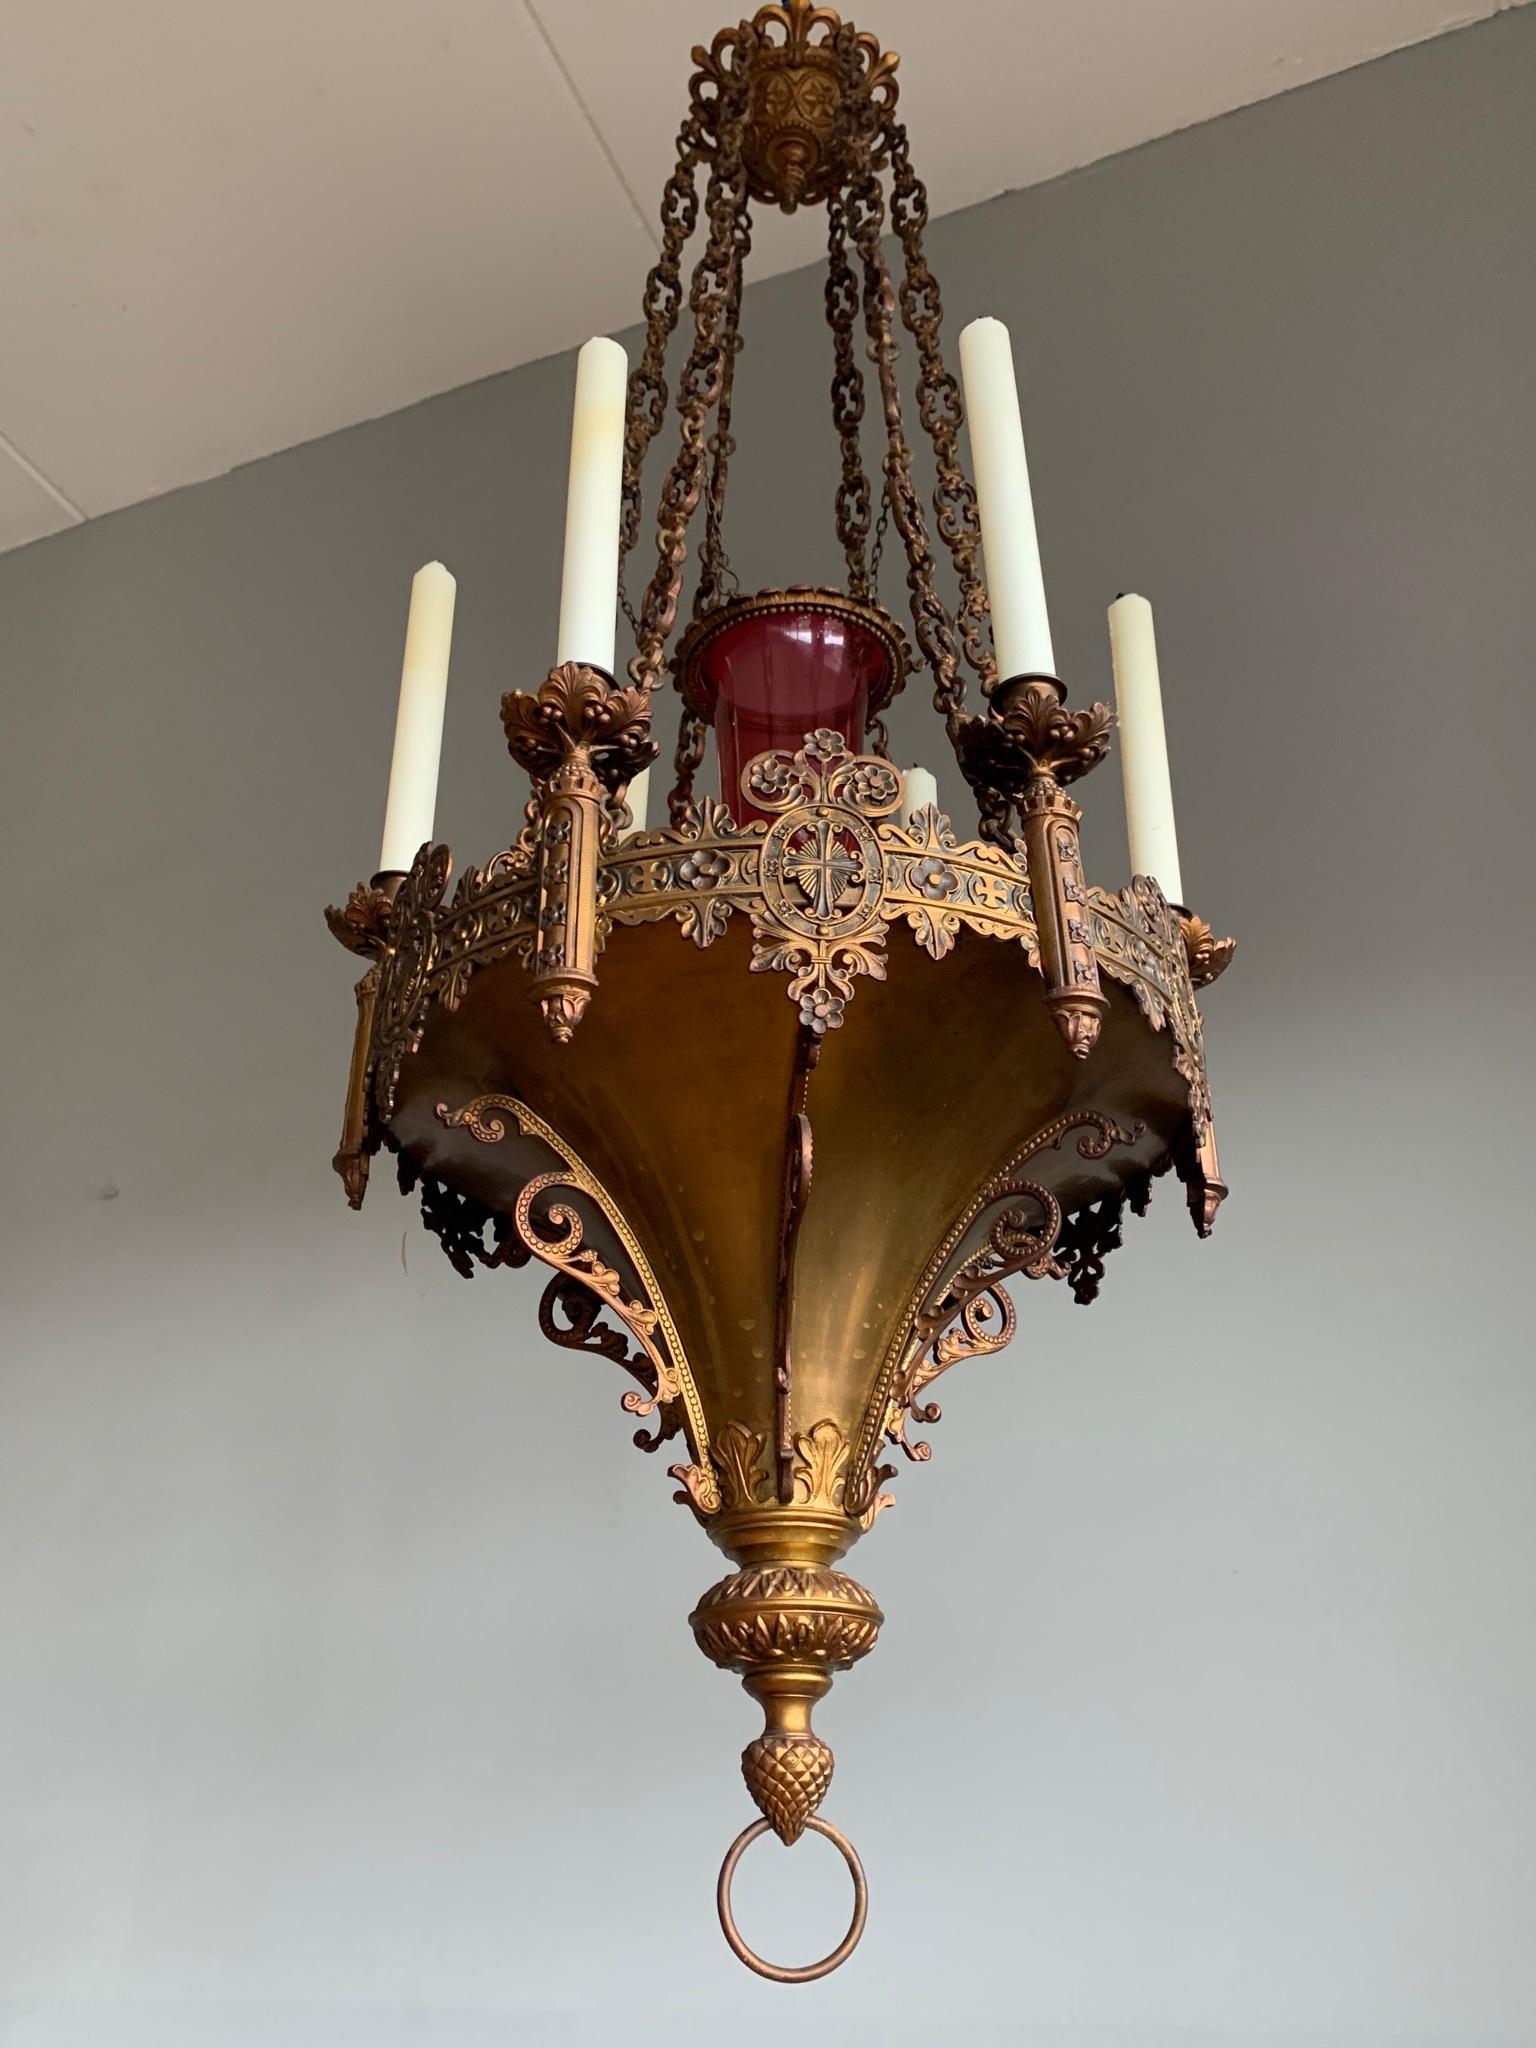 20th Century Gothic Revival Fine Bronze and Brass Church Candle Chandelier / Pendant Light